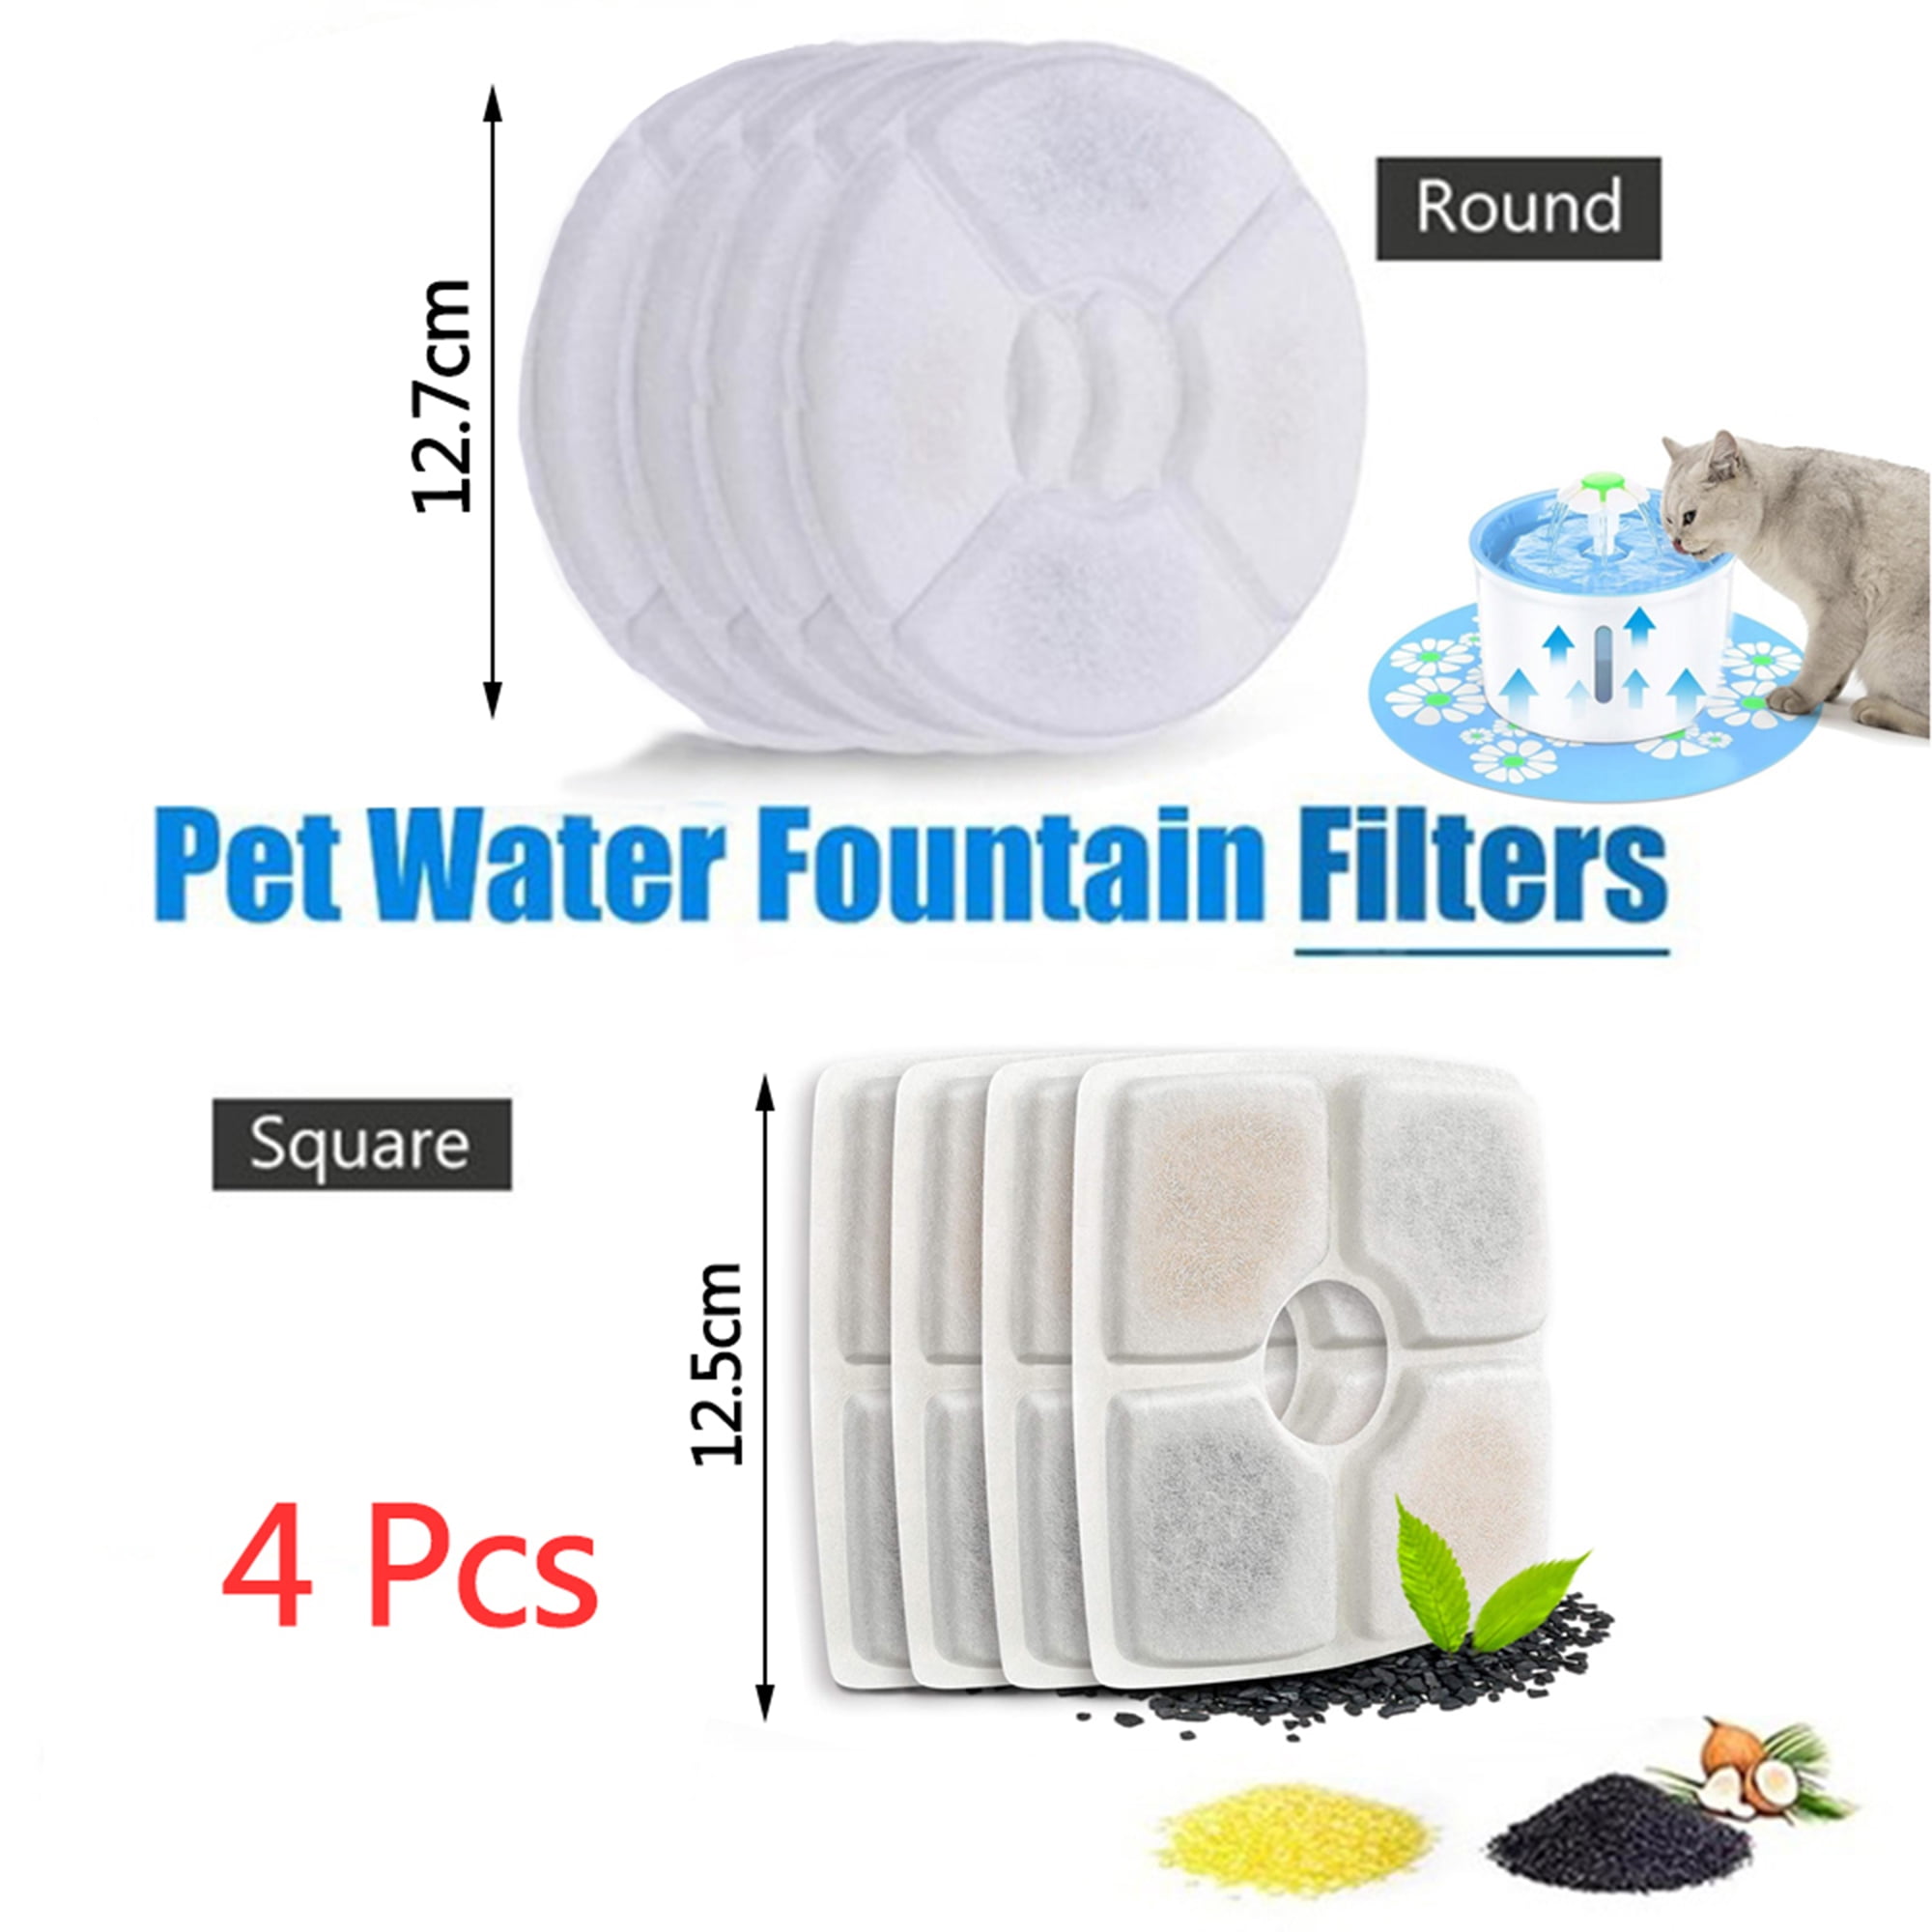 Carbon Replacement Filters for Cat and Dog Fountain Premiun Pet Water Fountain Dispenser Filters 6 Packs 